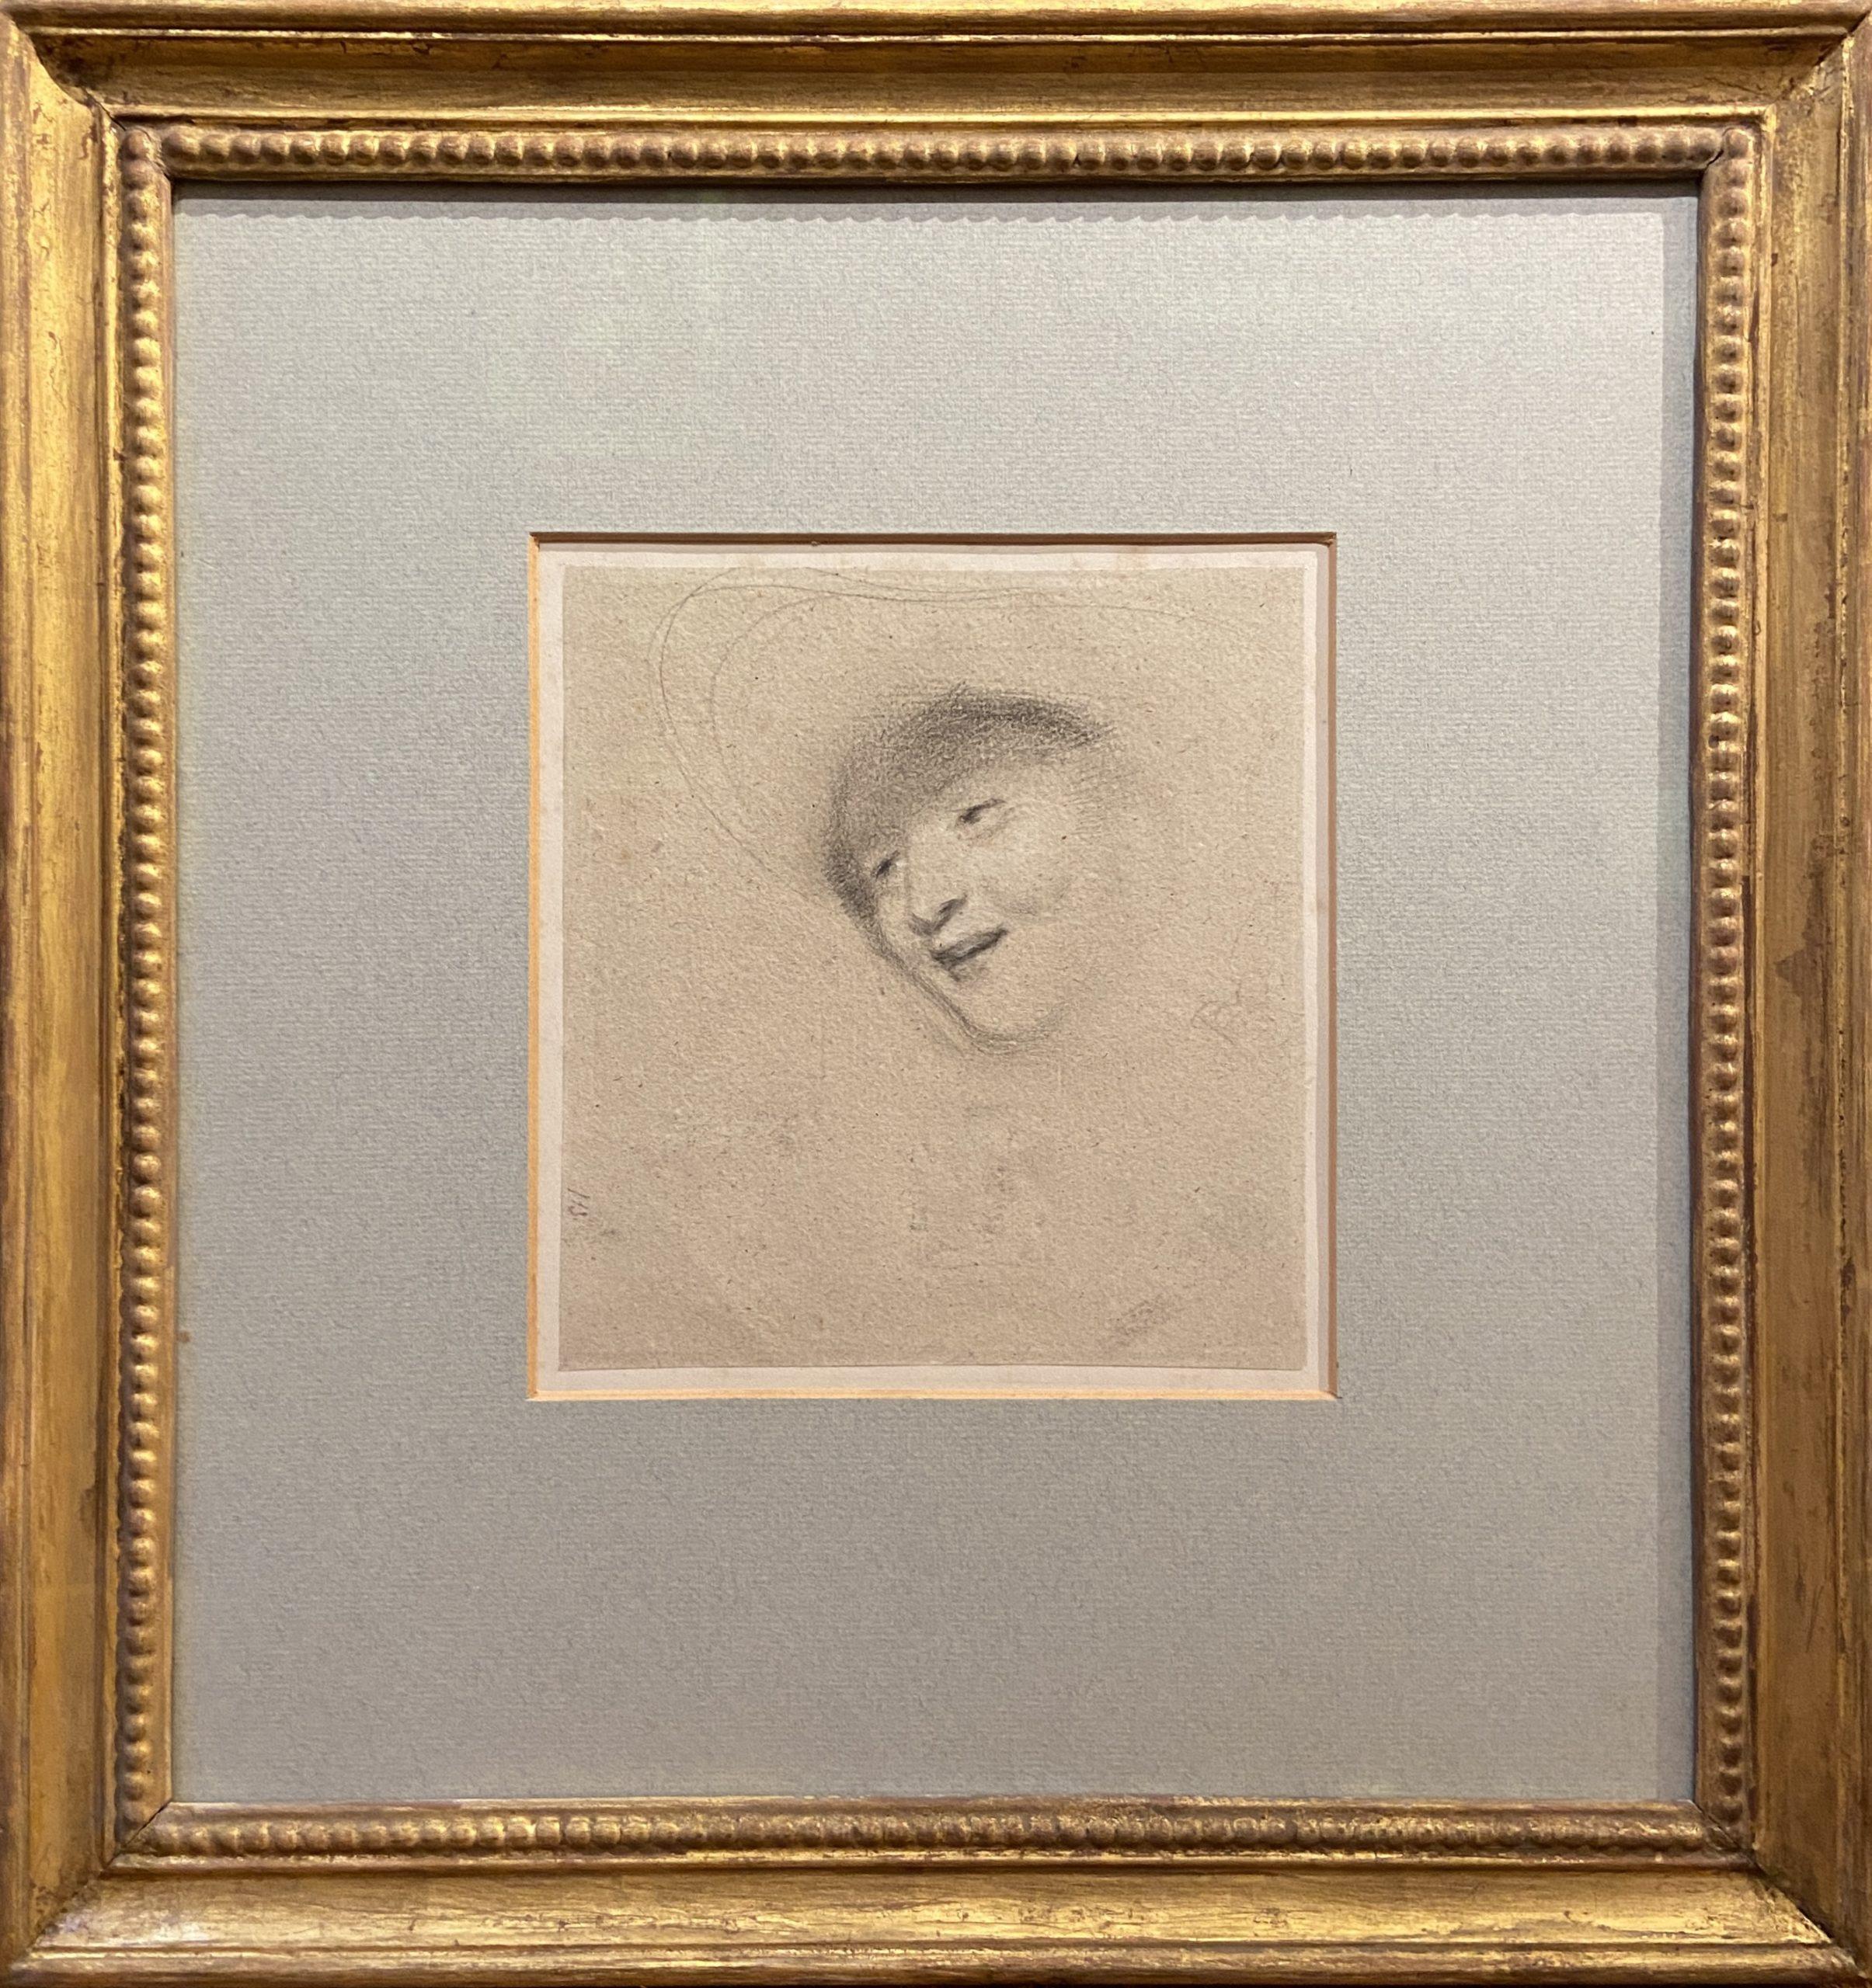 Graphite Study of a Head, Monogrammed Victorian Sketch, Gilt Fame - Art by Henry Perronet Briggs